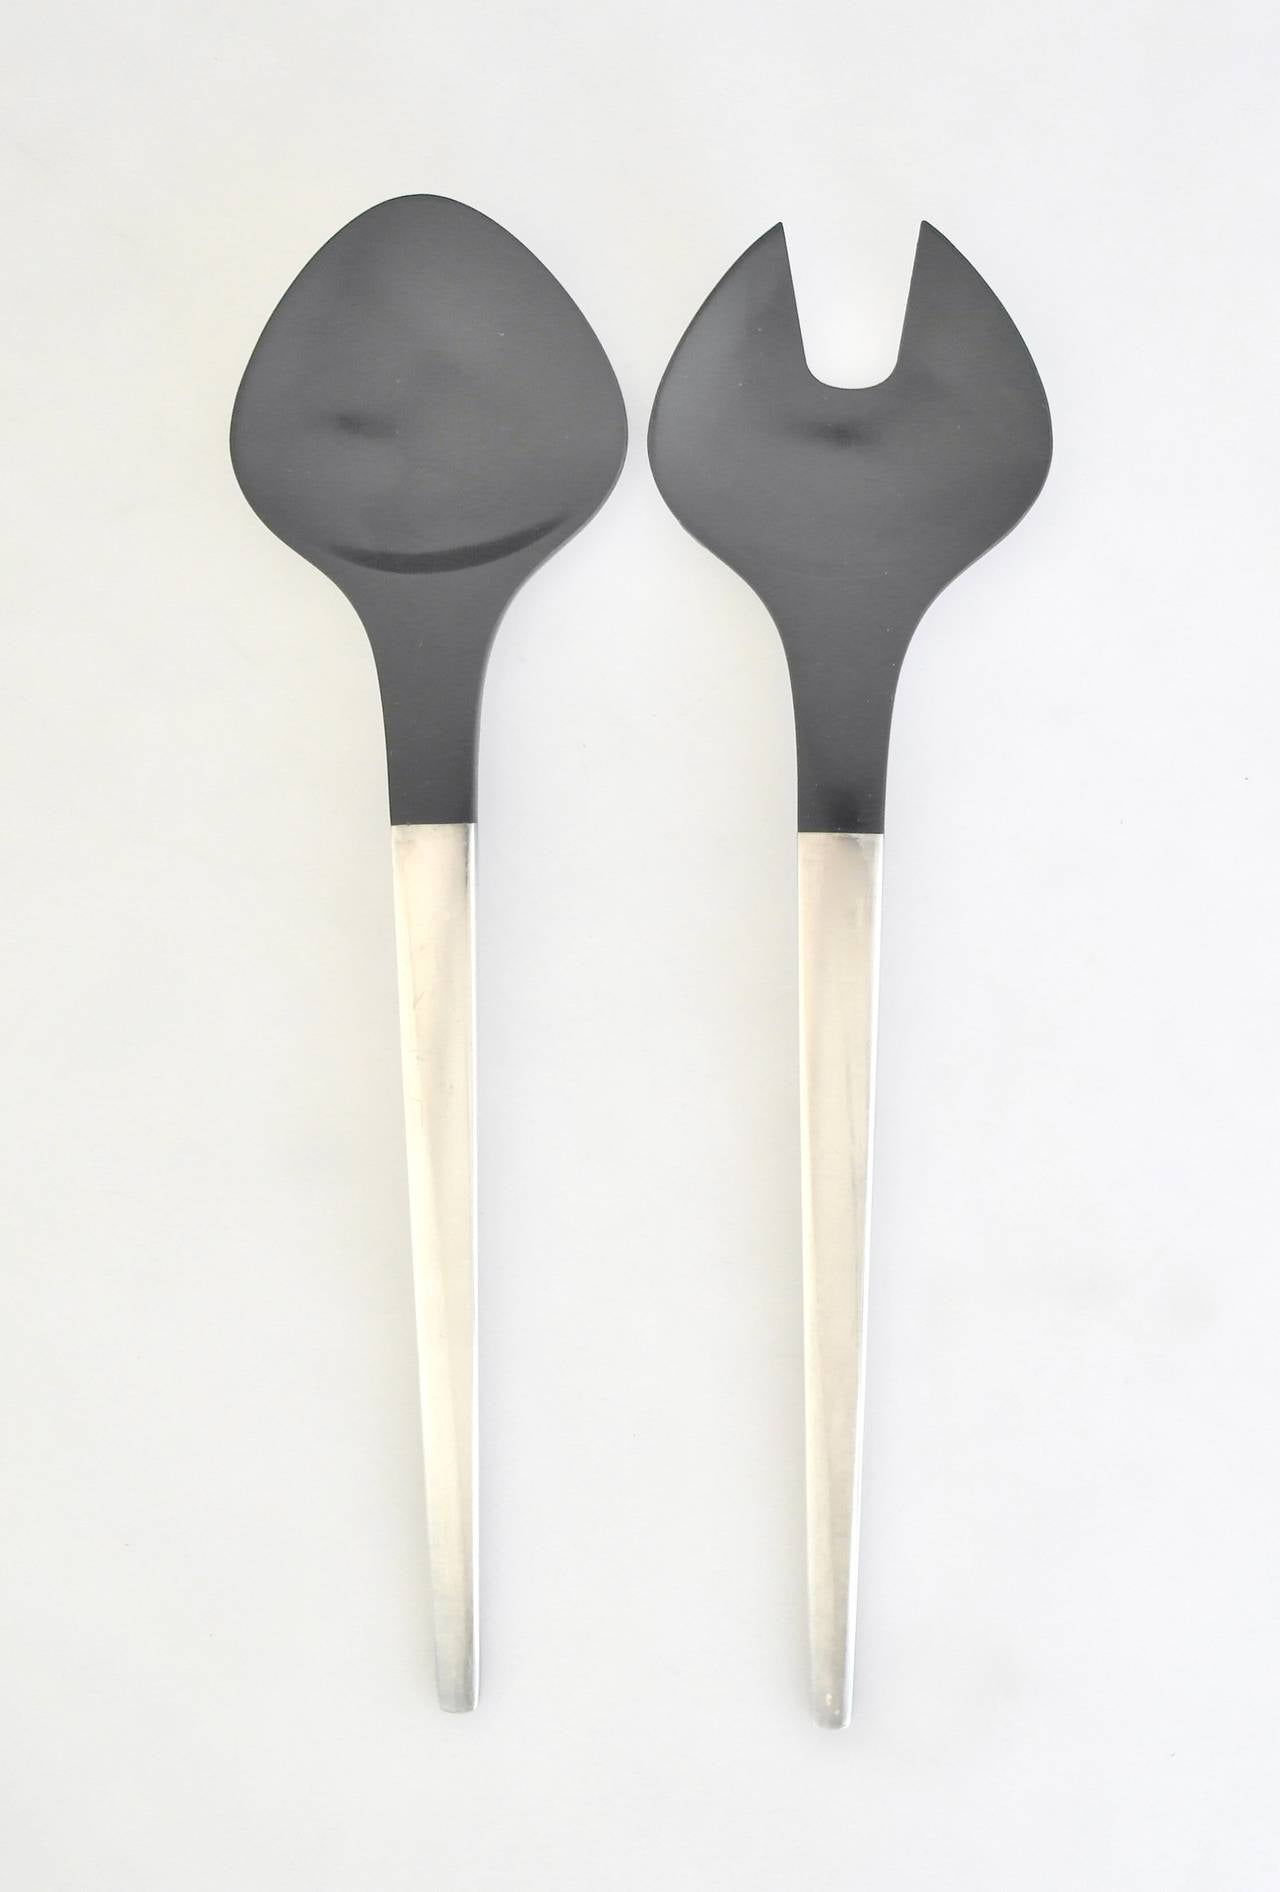 Being offered are pair of salad servers designed by Henning Koppel for Georg Jensen, comprising sterling silver handles extending to ebonized bakelite bowl and tines, in the sought after Caravel pattern, circa 1957. Dimensions: fork - 11 1/4